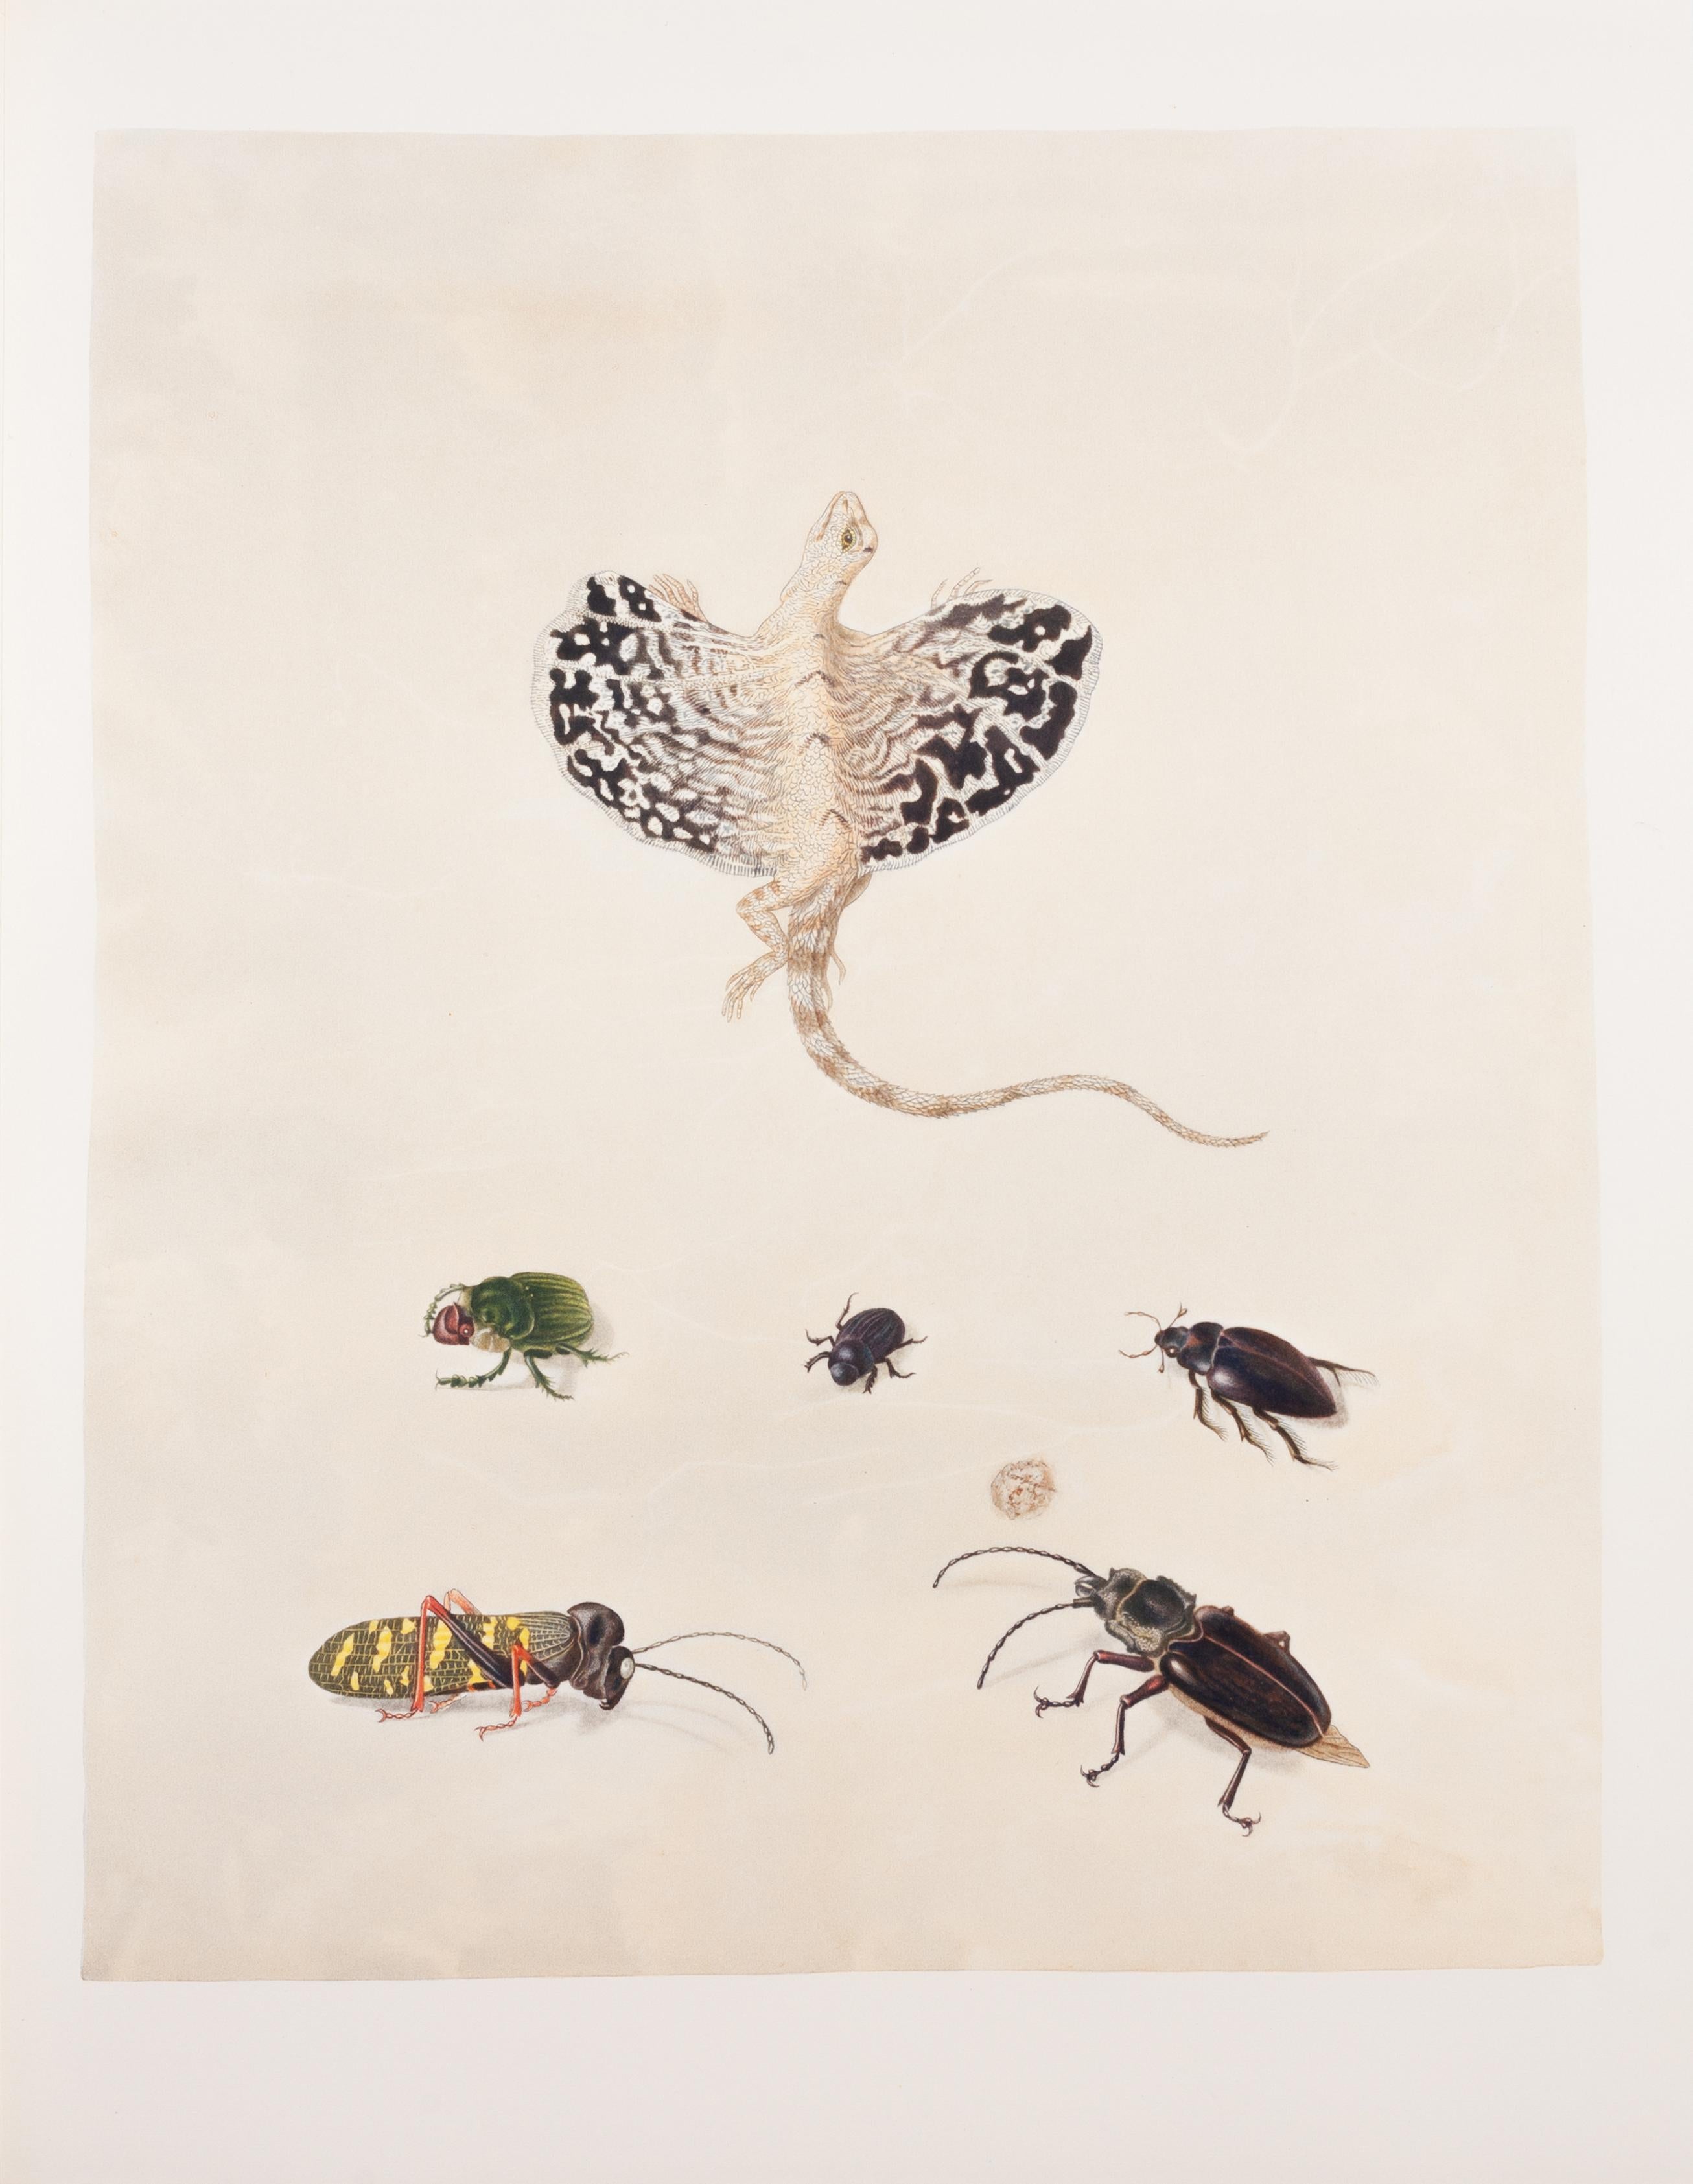 32. Shorthorned grasshopper, Dung beetle, Water scavenger beetle, Longhorned bee - Print by Maria Sybilla Merian